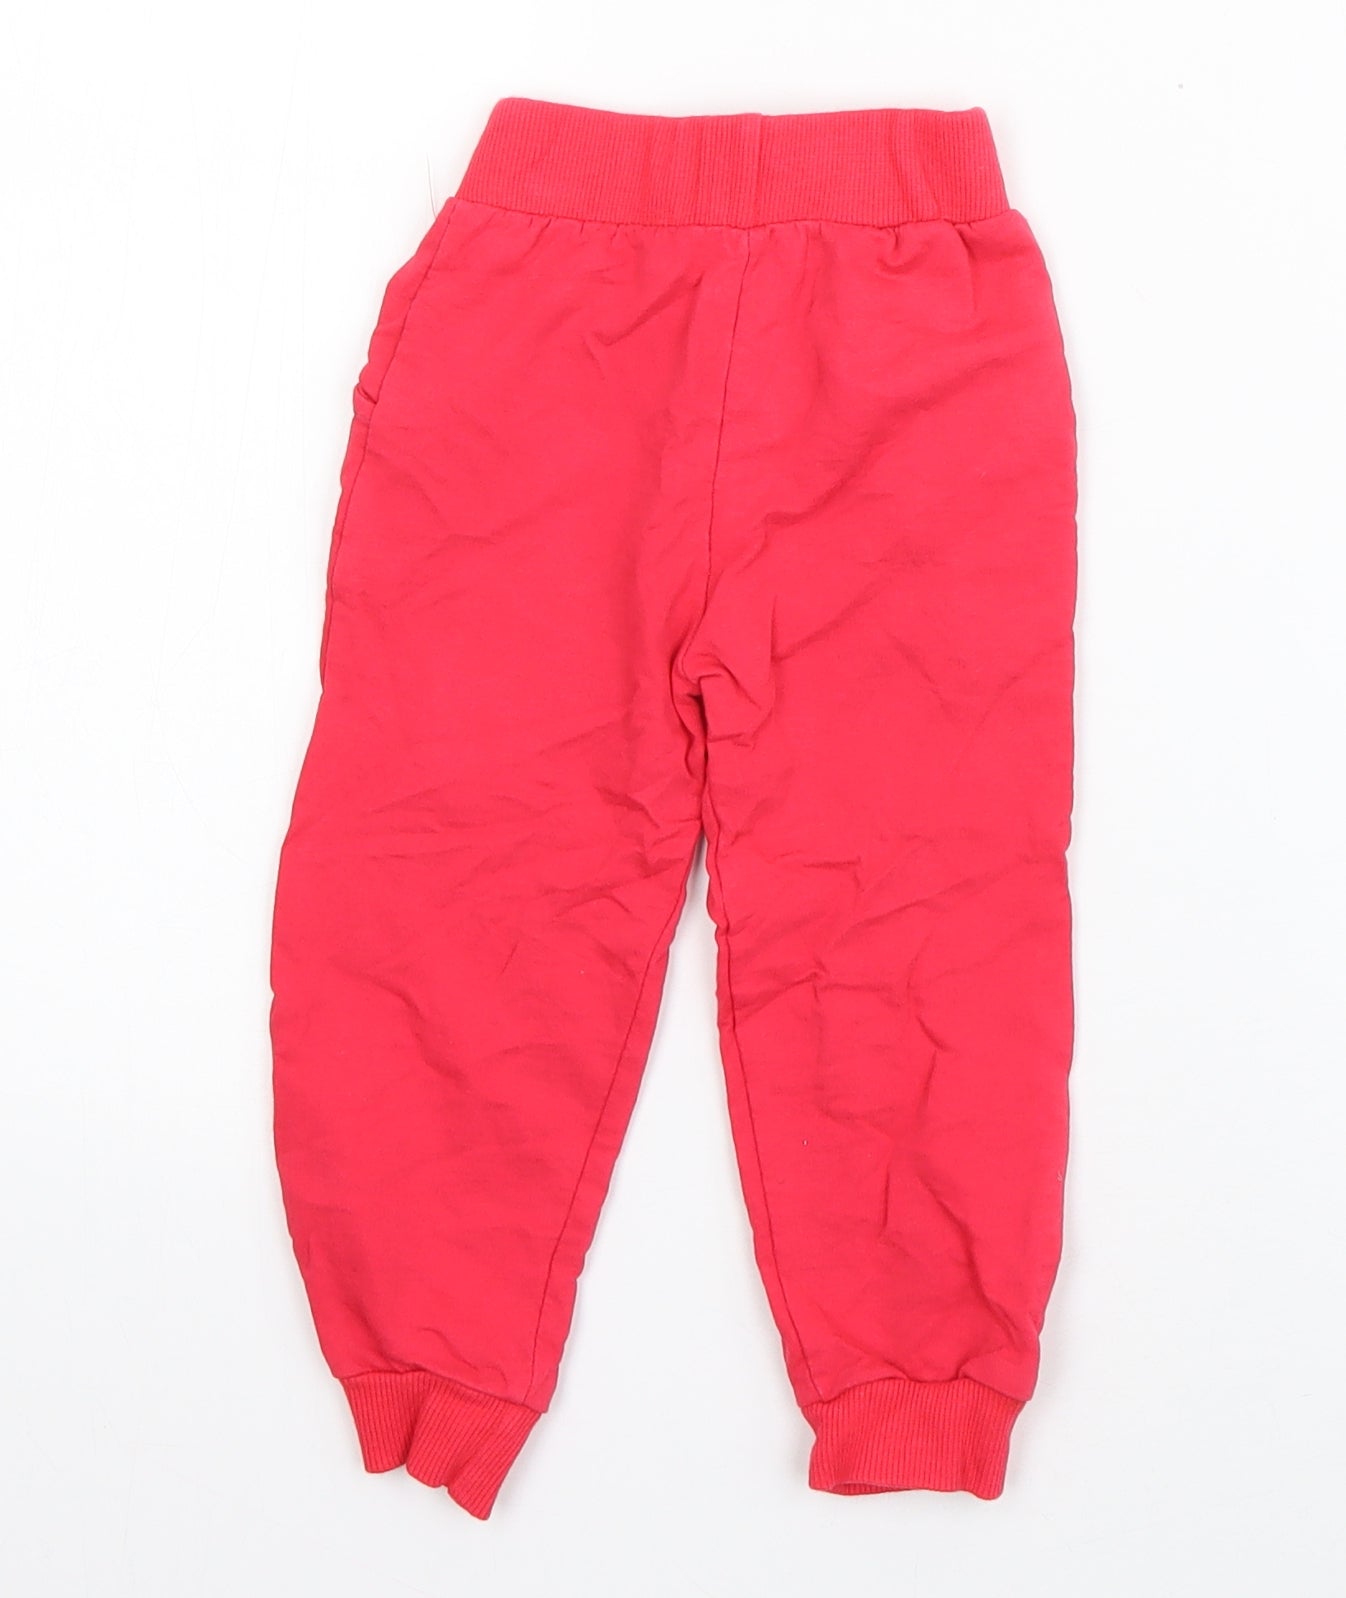 Preworb Girls Red  Cotton Jogger Trousers Size 2-3 Years  Regular  - Call me